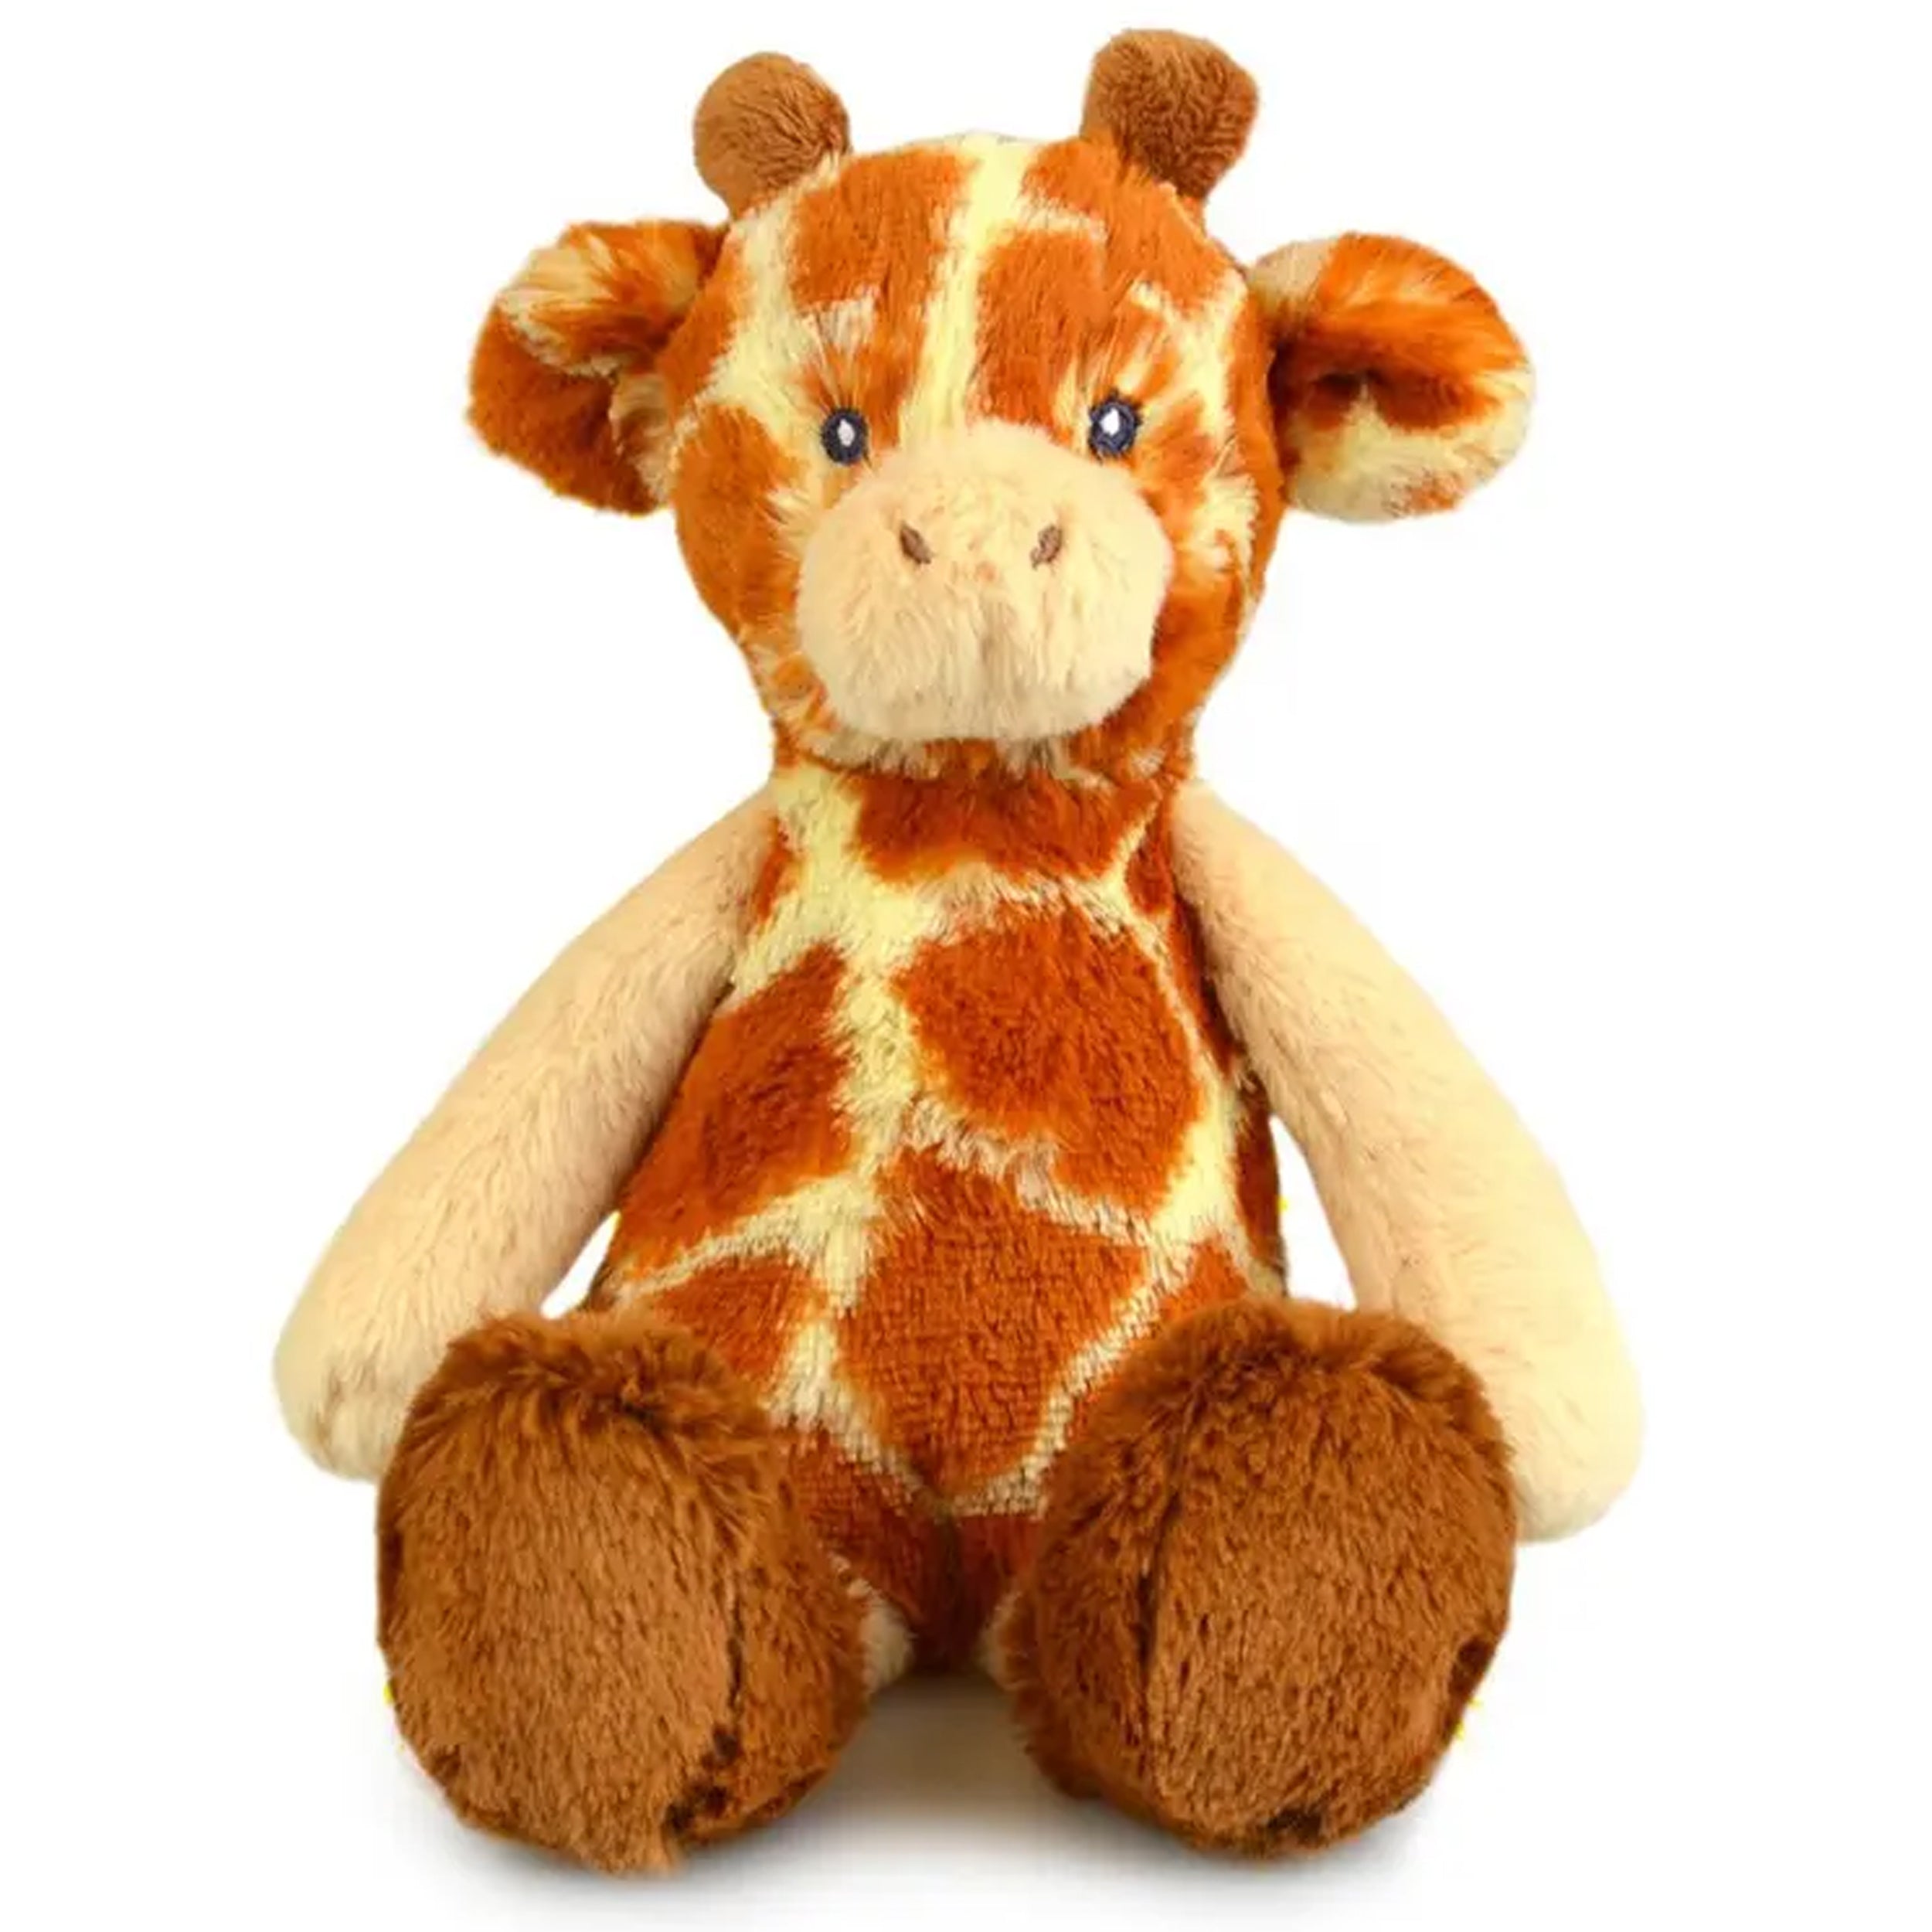 Bring Home Your Child's Favorite Animals with Our Soft Plush Toy Collection